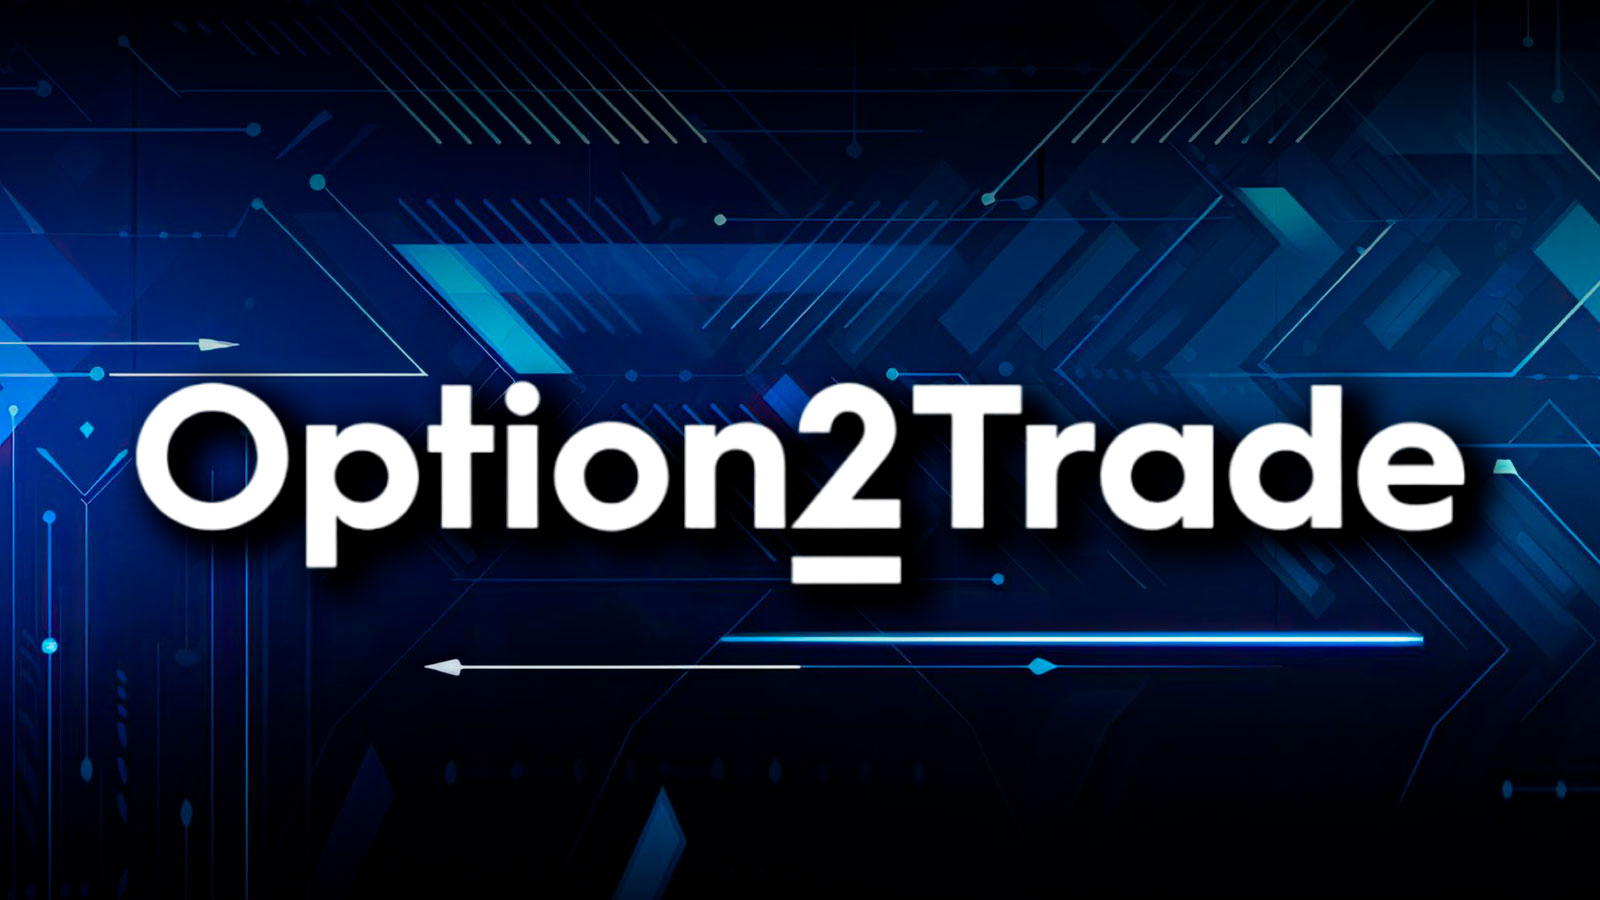 Option2Trade (O2T) Pre-Sale On-Boards Passionate Supporters in February as Ethereum (ETH), Injective (INJ) Top Altcoins Gain Traction Again